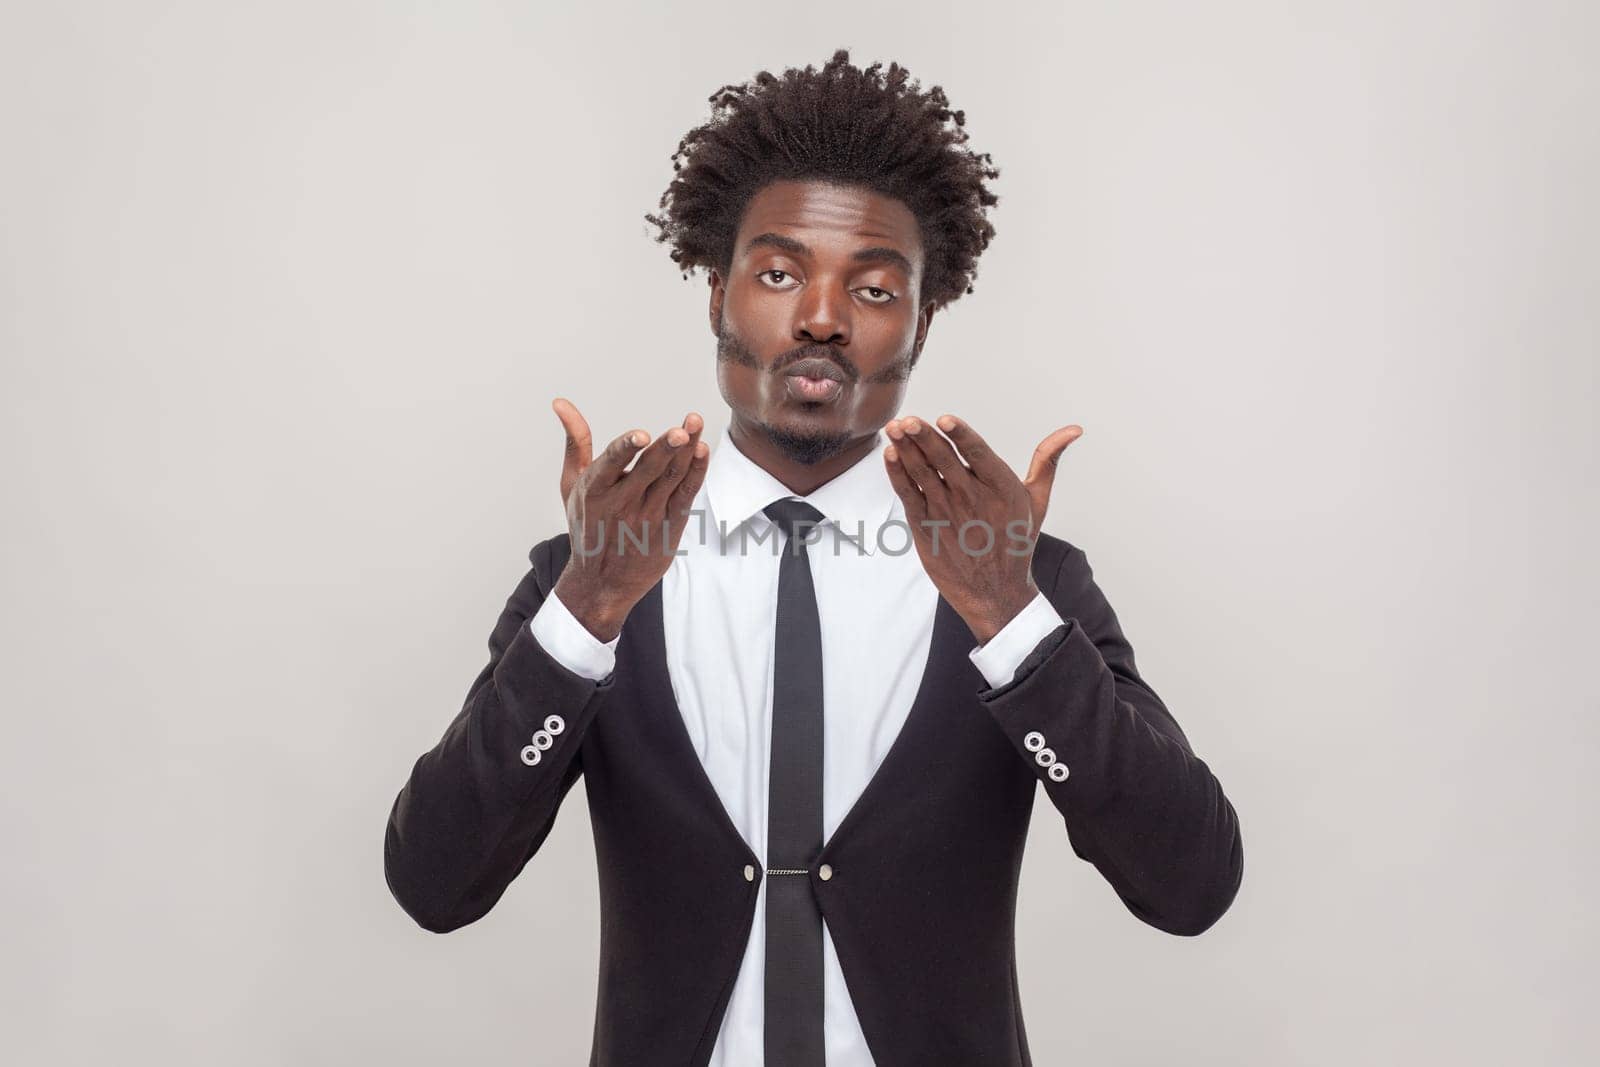 Portrait of pleased man with Afro hairstyle stretches hands near face, blows air kiss, expresses love and affection, wearing white shirt and tuxedo. Indoor studio shot isolated on gray background.